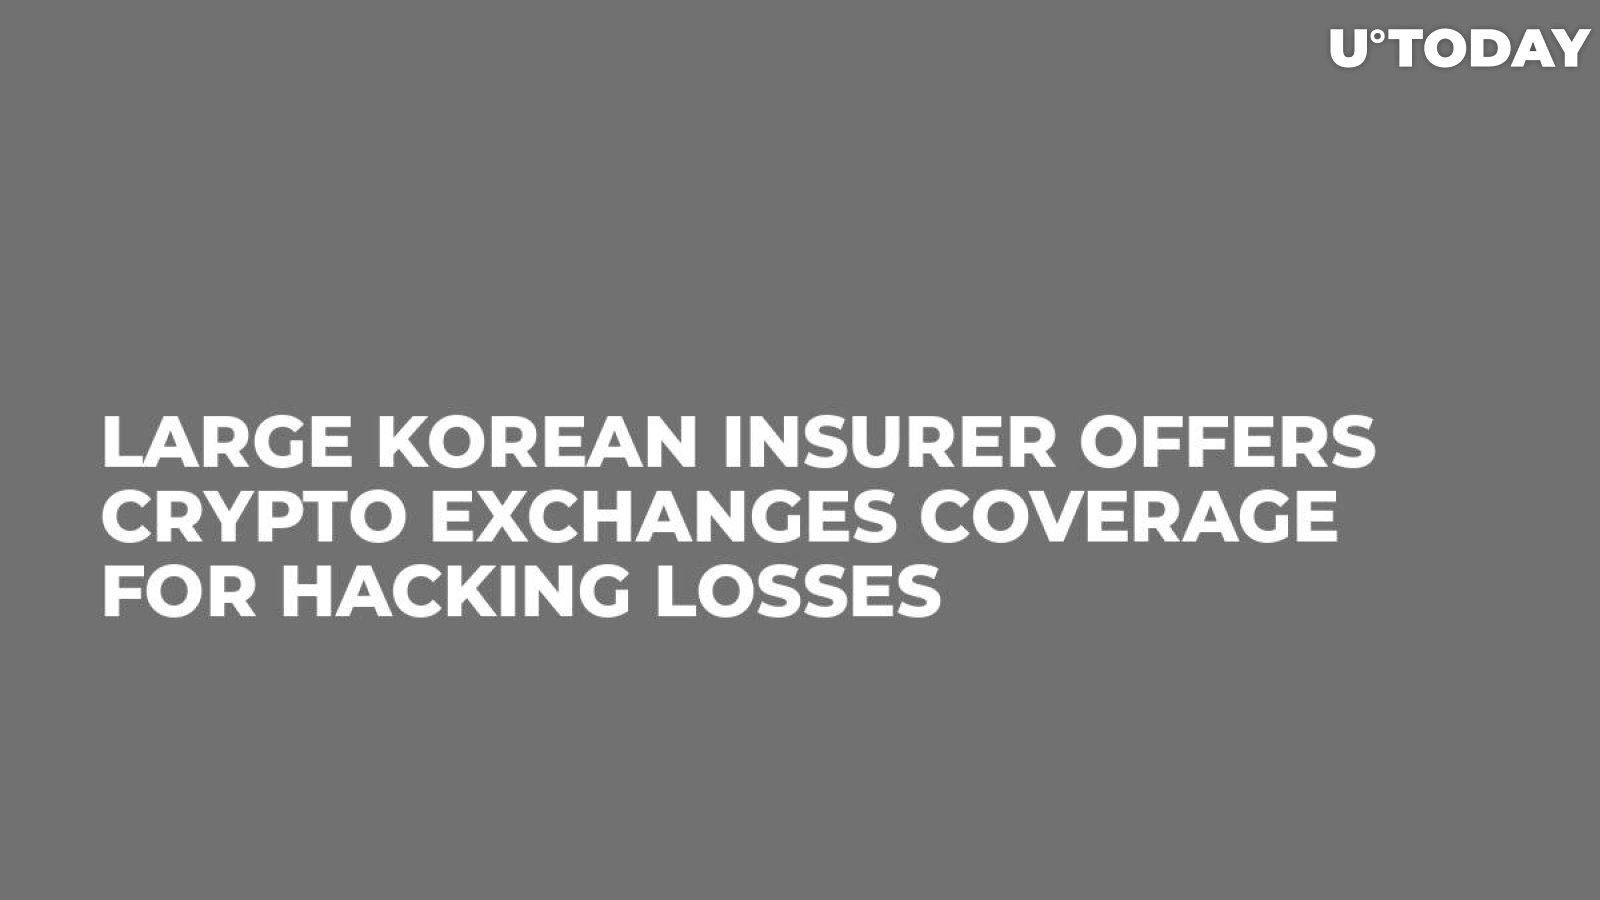 Large Korean Insurer Offers Crypto Exchanges Coverage For Hacking Losses